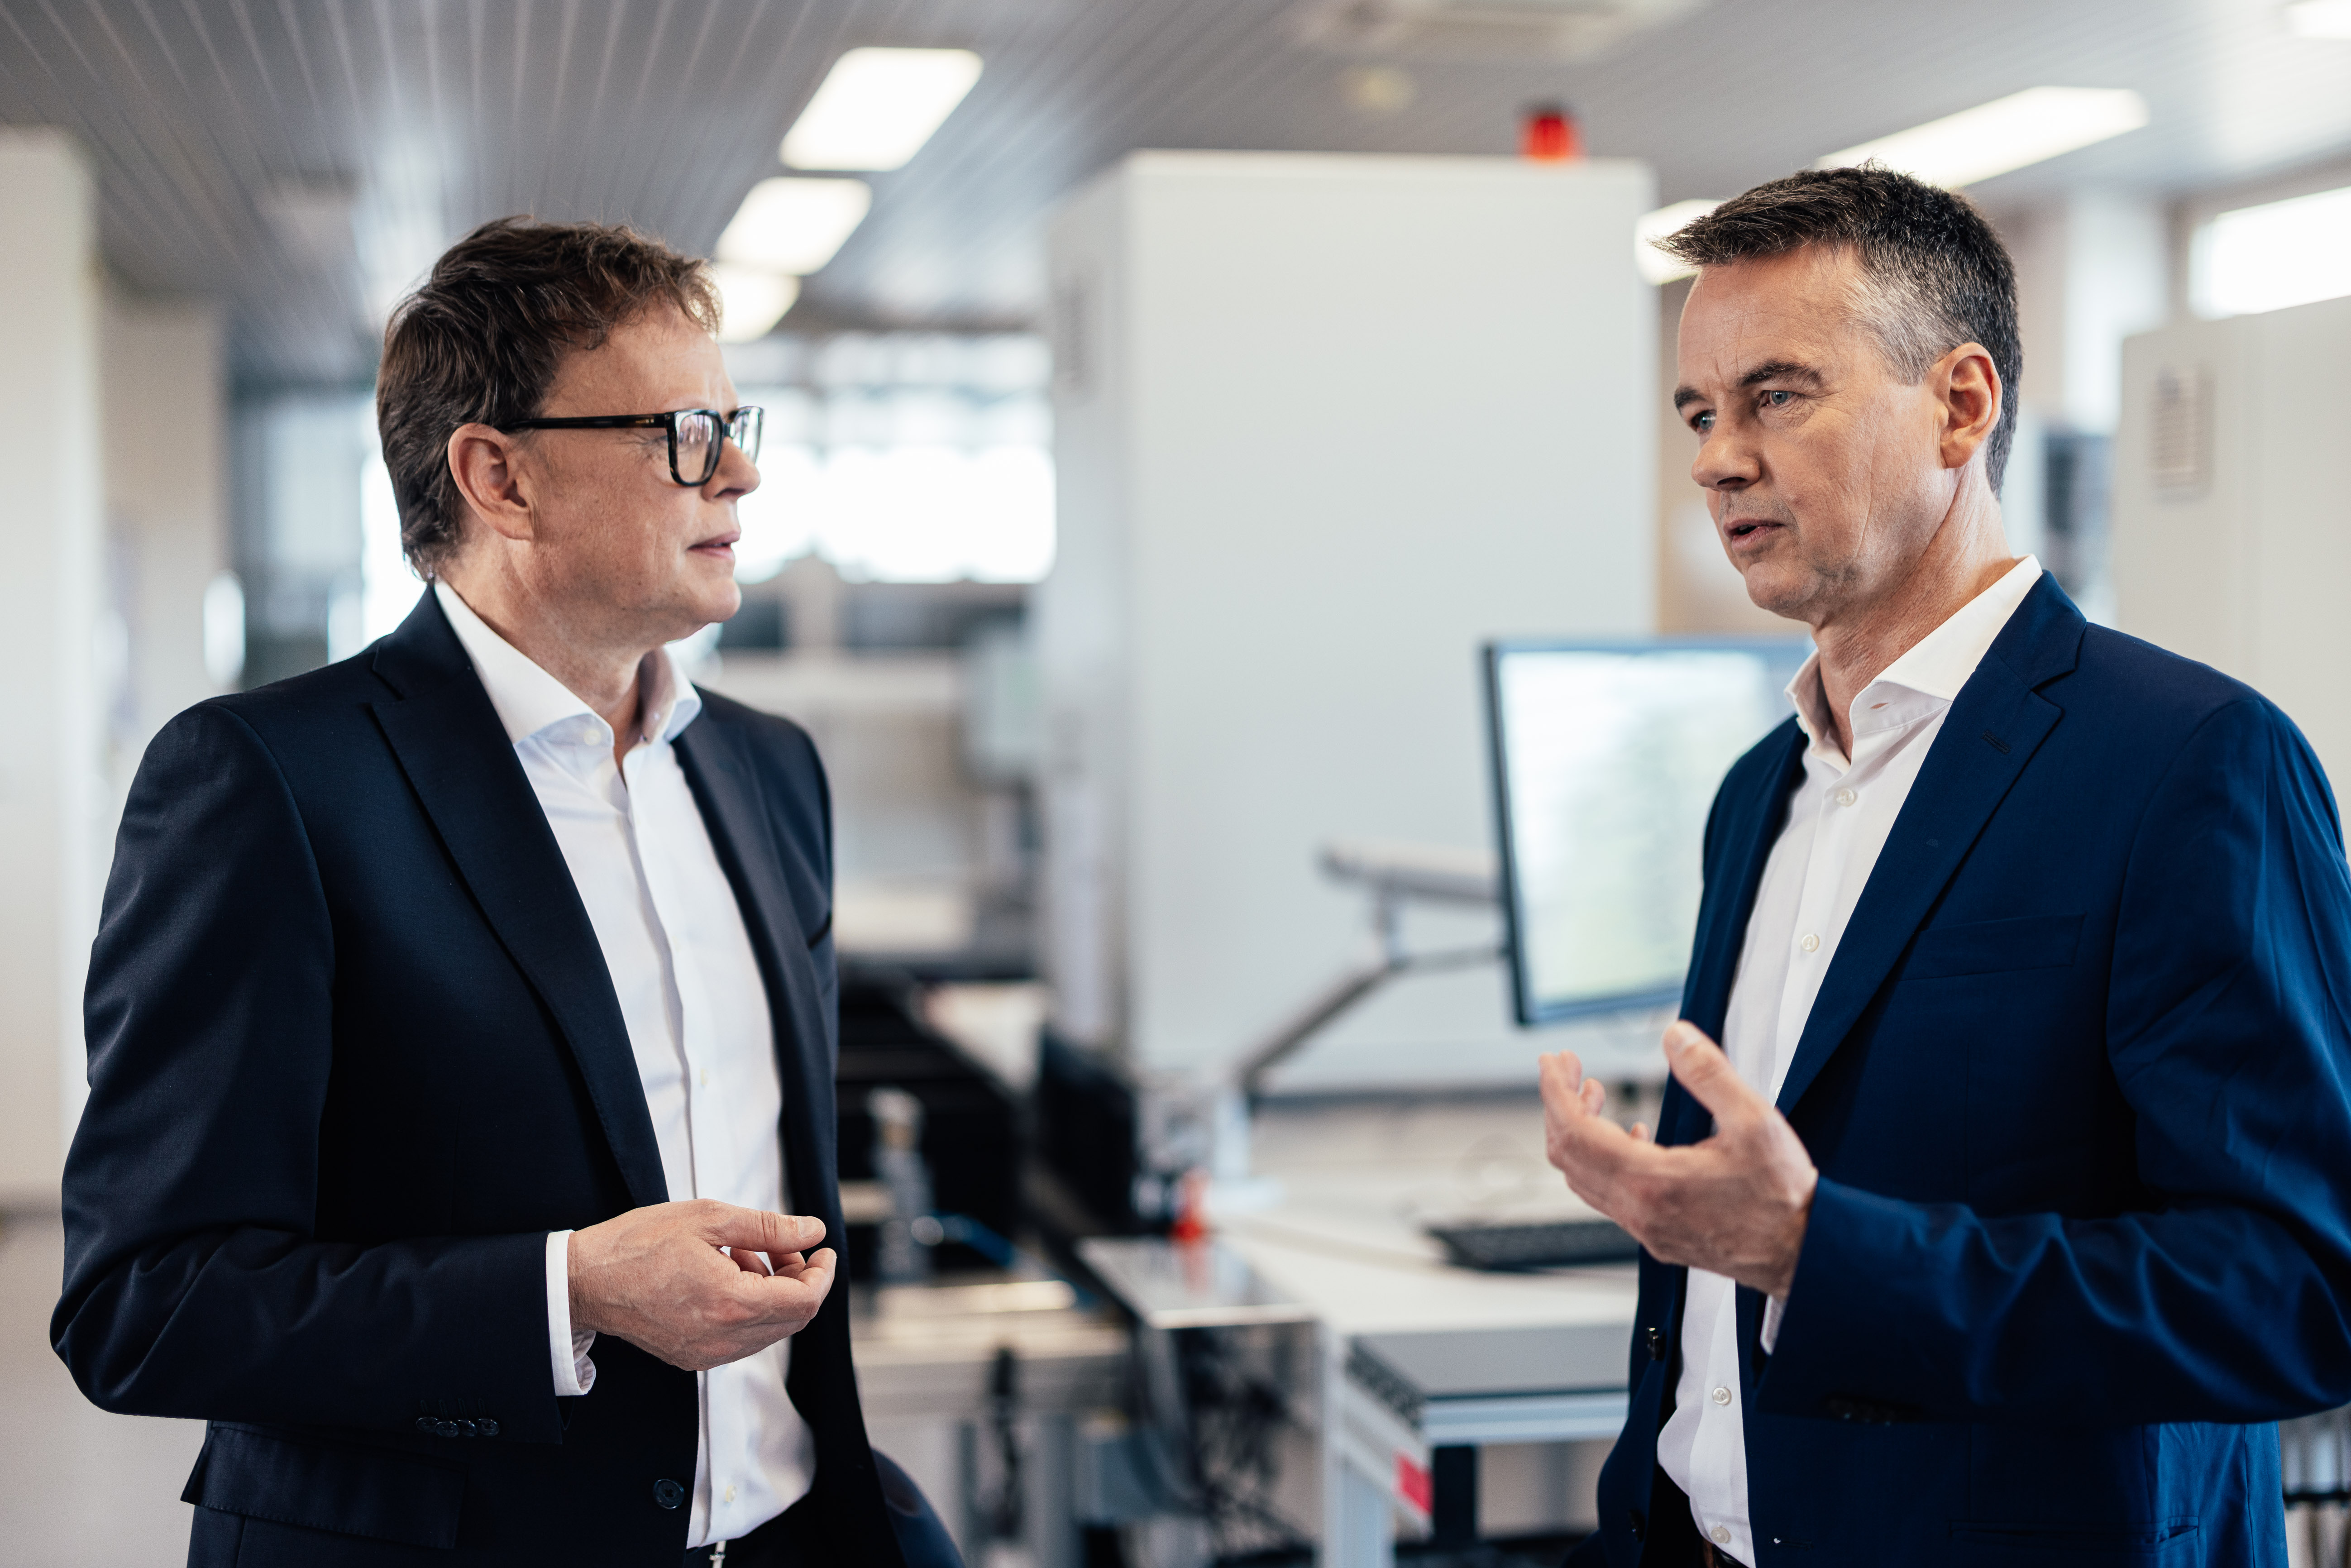 The image shows the Noris managing directors Michael and Florian Schmidmer disussing in a bright white coloured room in the company.